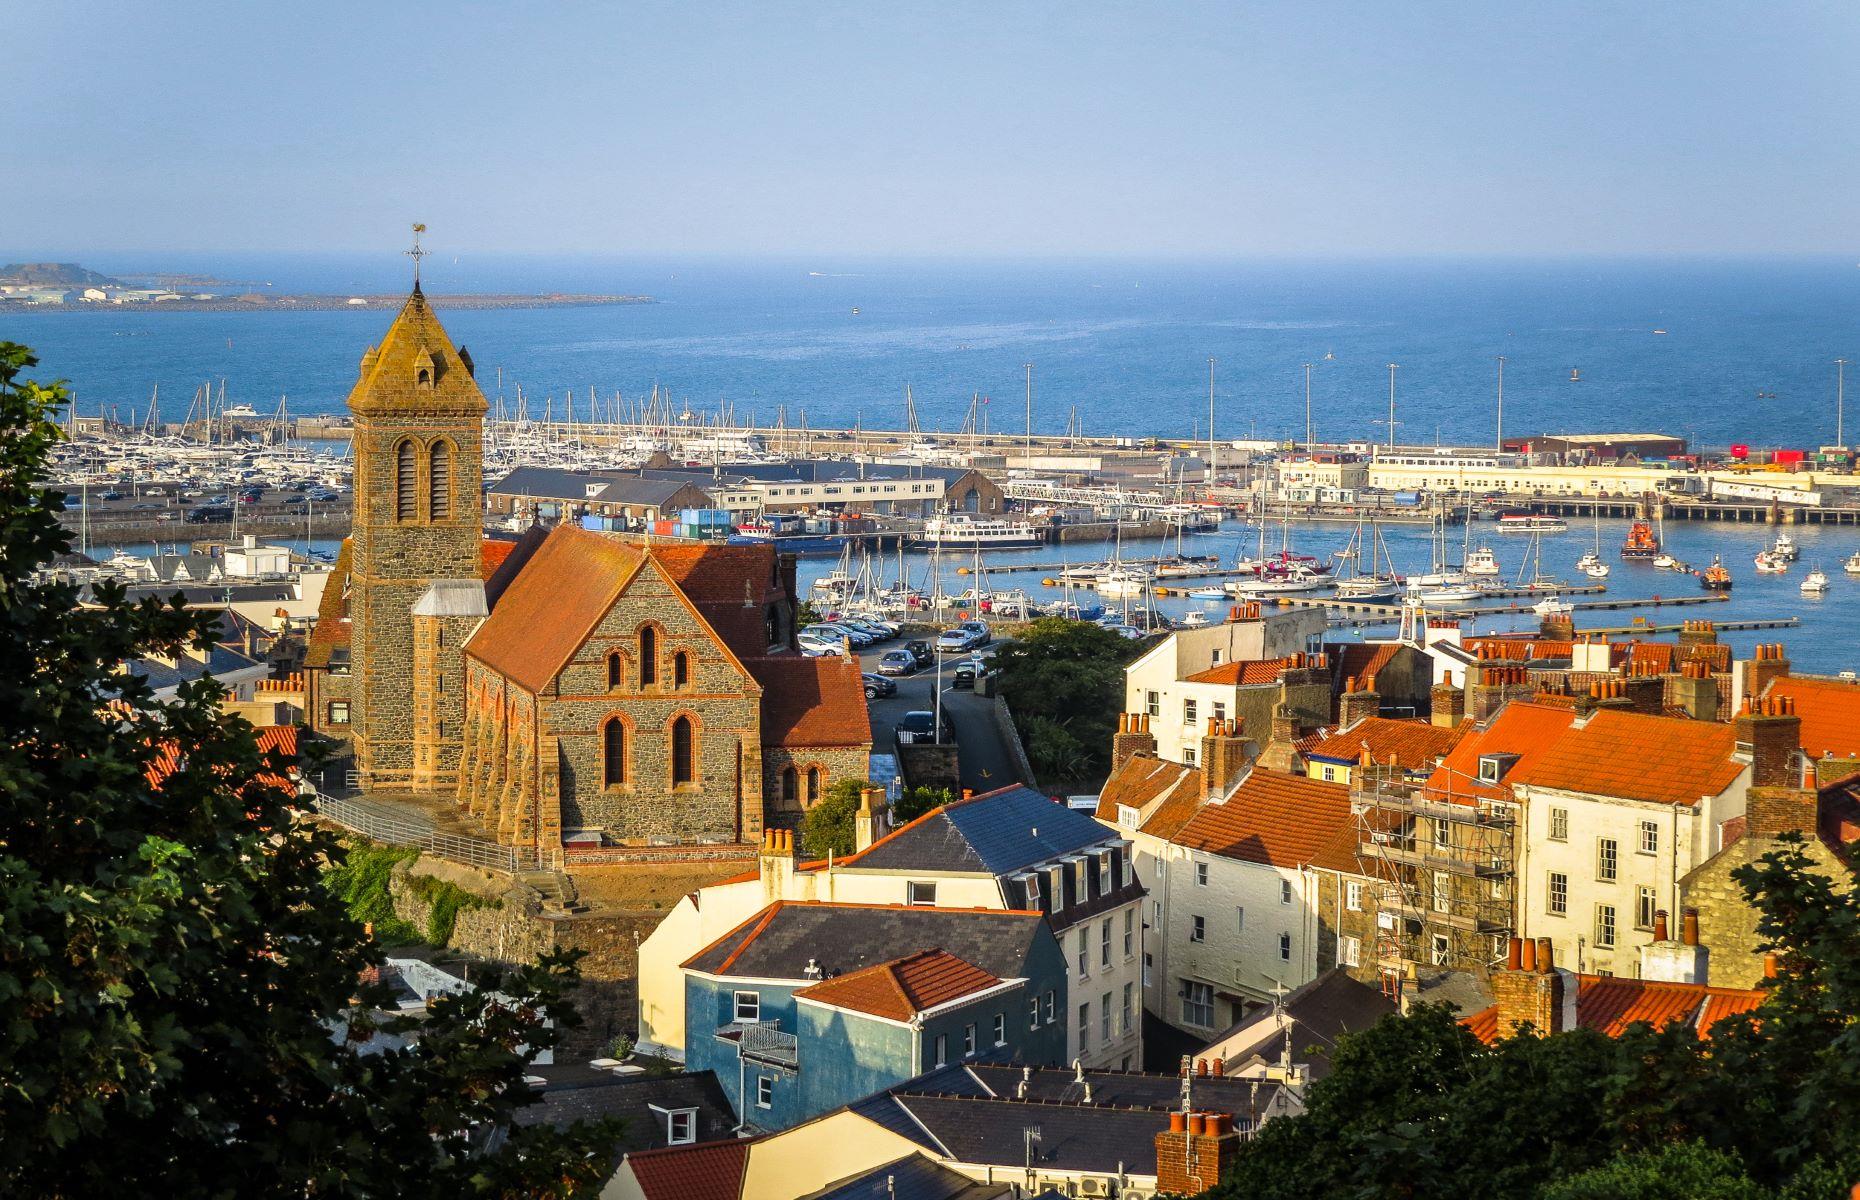 <p><strong>Index score: 70.88</strong></p>  <p>14th on our list is Guernsey, the second largest of the Channel Islands. The cost of living in this British Crown Dependency is 17.66% higher than it is in the UK, with rent prices a staggering 48.12% higher. Property prices in general are incredibly high: according to the BBC, house prices in Guernsey rose by nearly 20% last year and the average home now costs over £550,000 ($667k).</p>